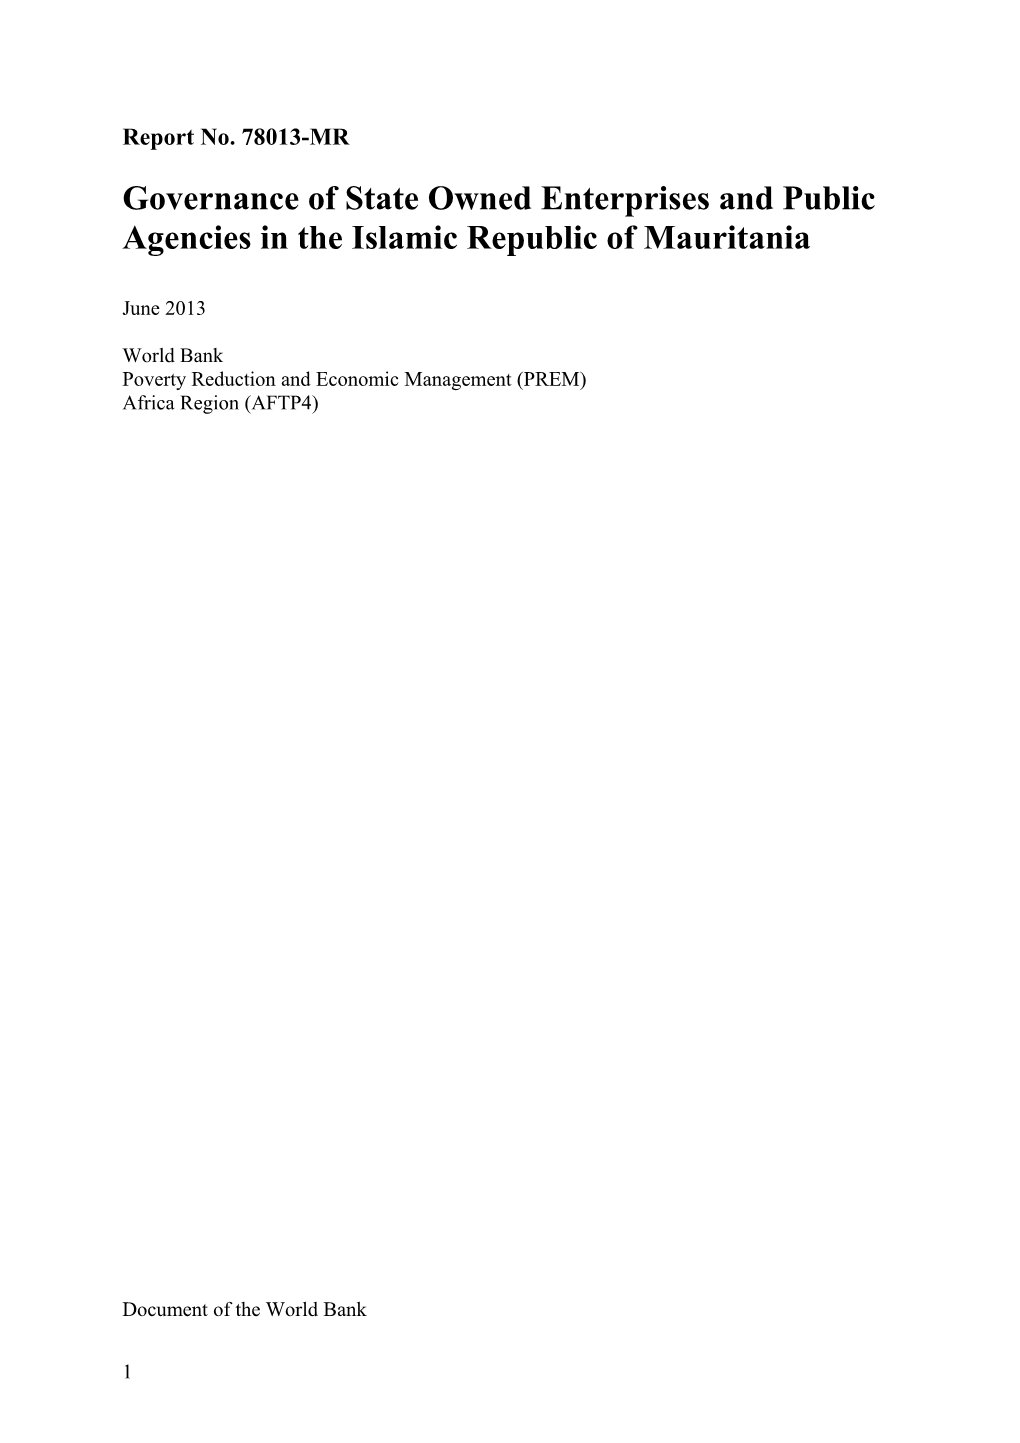 Governance of State Owned Enterprises and Public Agencies in the Islamic Republic of Mauritania